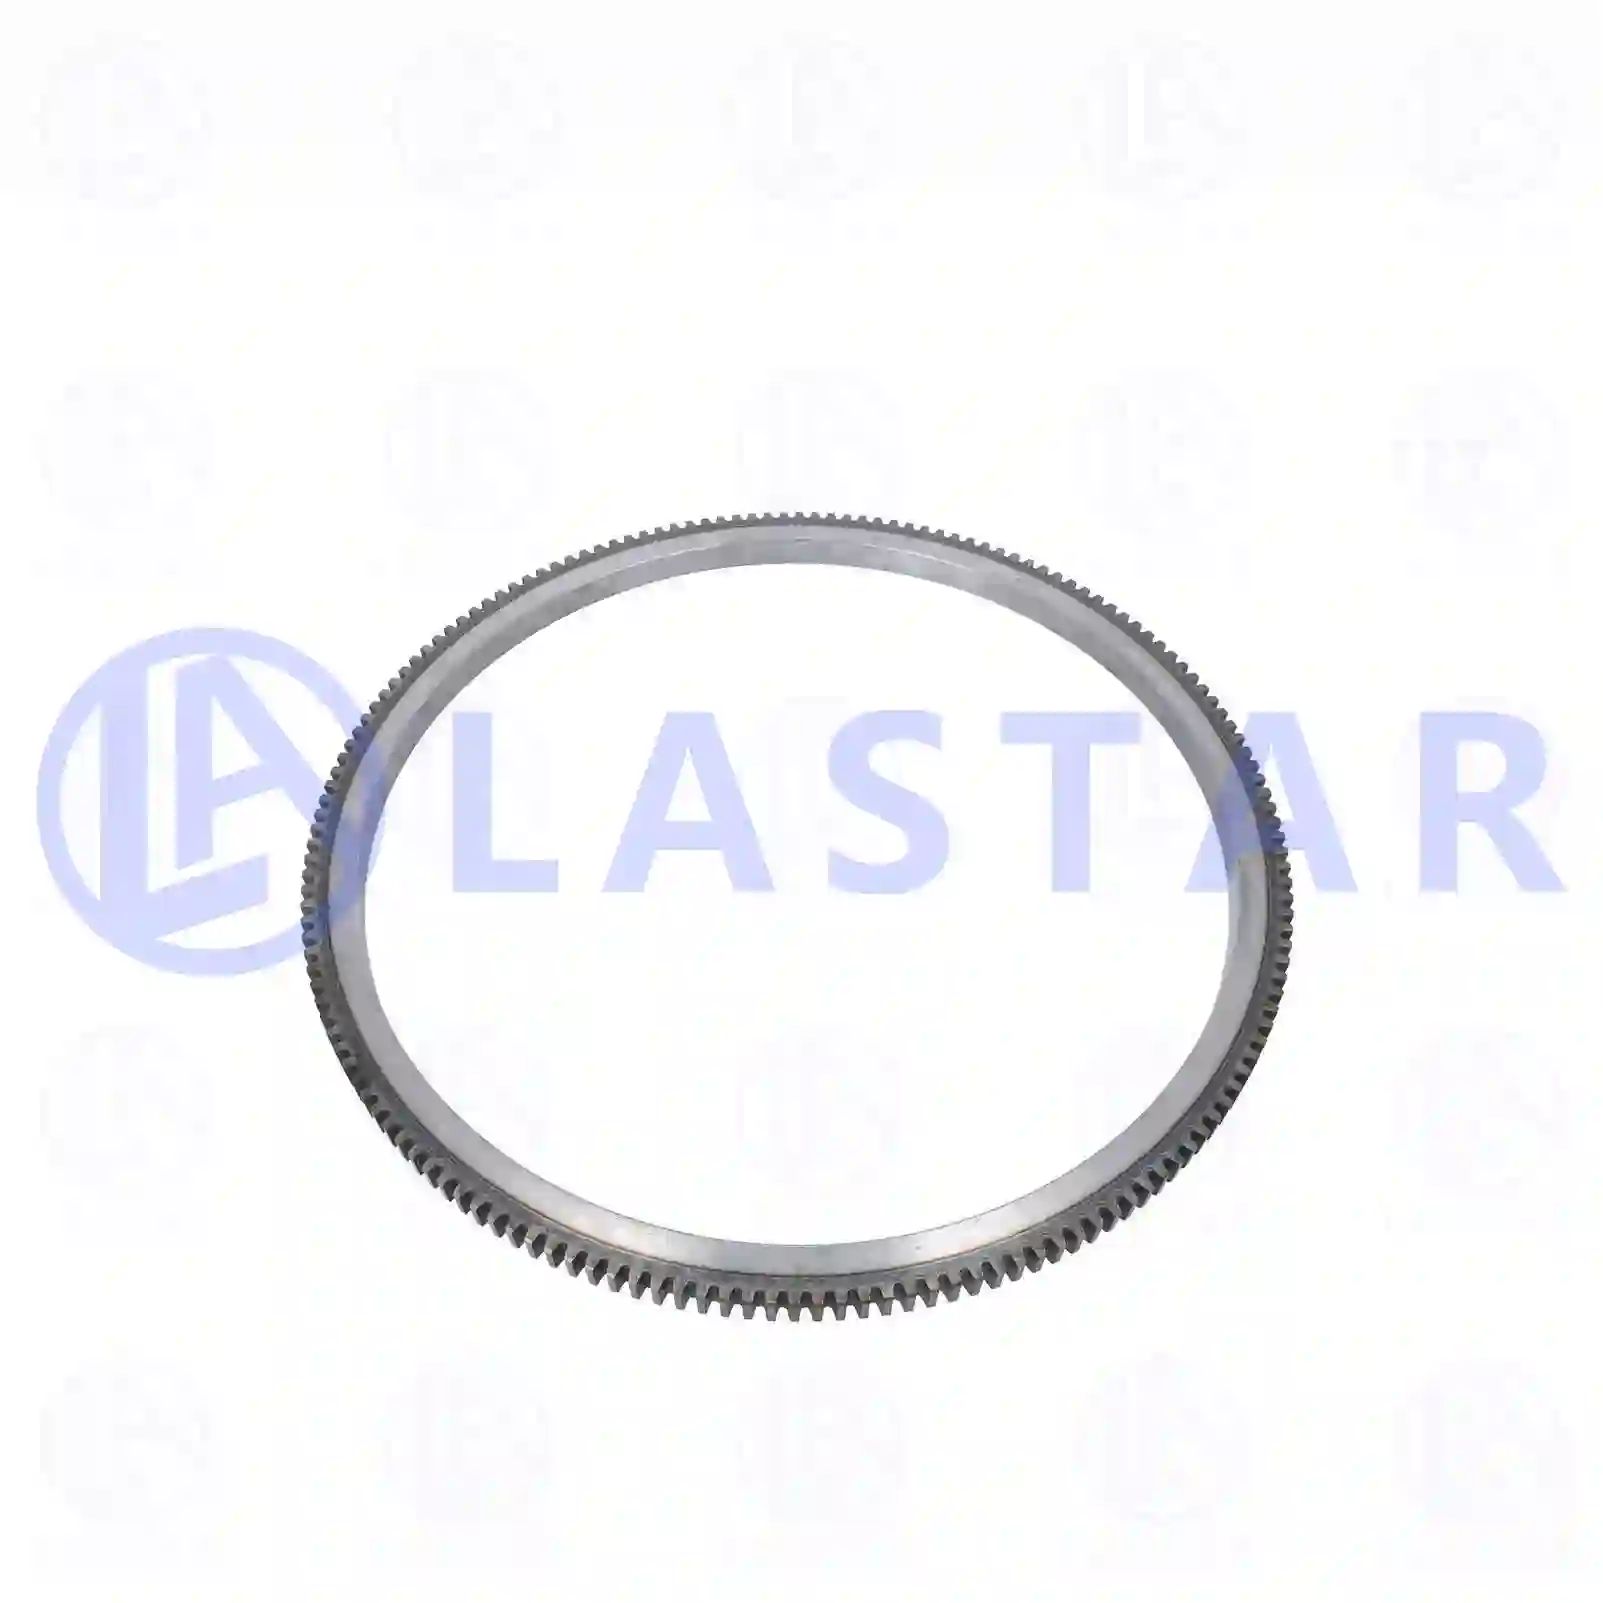 Ring gear, 77702070, 4000320005, 9060320005, 9060320005 ||  77702070 Lastar Spare Part | Truck Spare Parts, Auotomotive Spare Parts Ring gear, 77702070, 4000320005, 9060320005, 9060320005 ||  77702070 Lastar Spare Part | Truck Spare Parts, Auotomotive Spare Parts